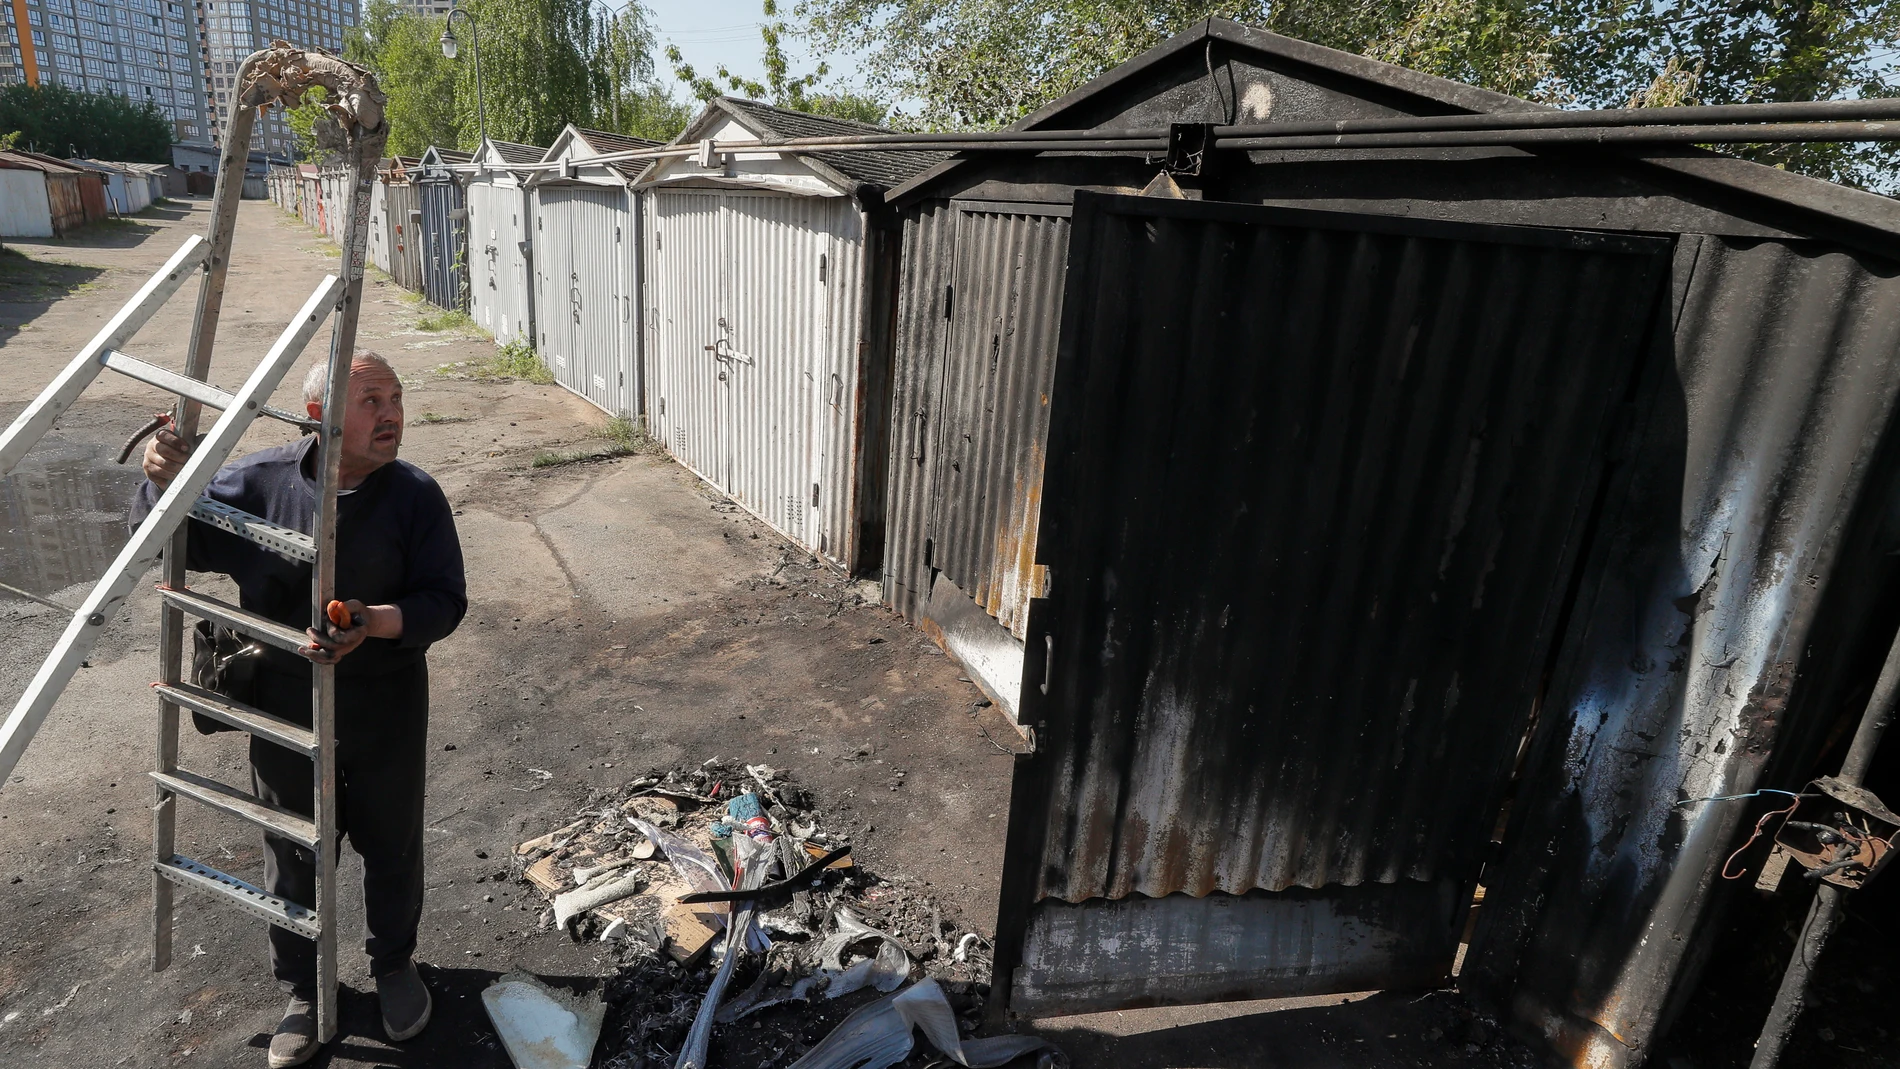 Kyiv (Ukraine), 18/05/2023.- A man inspects a garage after the falling of debris from a rocket that was shot down during night shelling, in Kyiv (Kiev), Ukraine, 18 May 2023, amid the Russian invasion. The Air Force Command of the Armed Forces of Ukraine confirmed on 18 May that a total of 30 sea, air, and land-based cruise missiles were launched on the Ukrainian territory on the night between 17 and 18 May, with 29 missiles successfully shot down. Nobody was killed or injured during that attack. (Atentado, Rusia, Ucrania) EFE/EPA/SERGEY DOLZHENKO